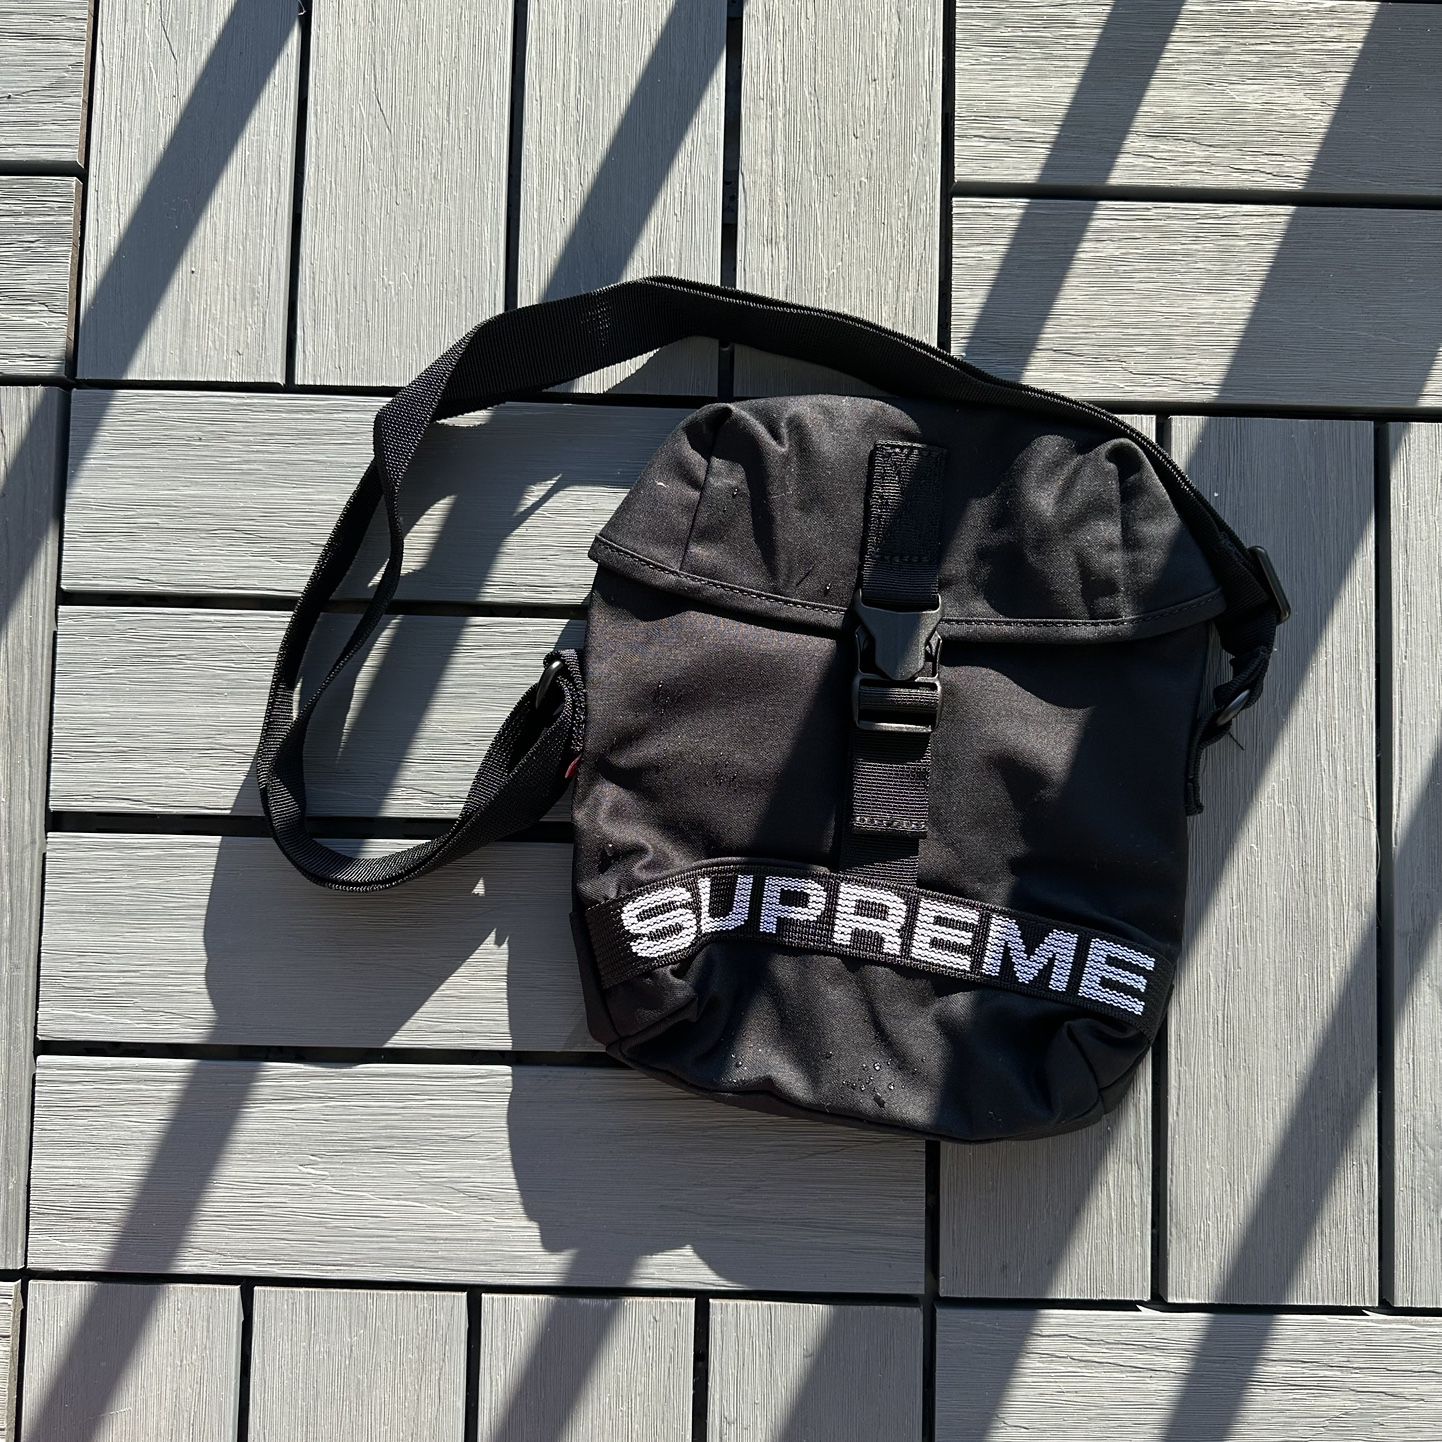 Supreme Duffle Bag (FW22) Black for Sale in Bvl, FL - OfferUp